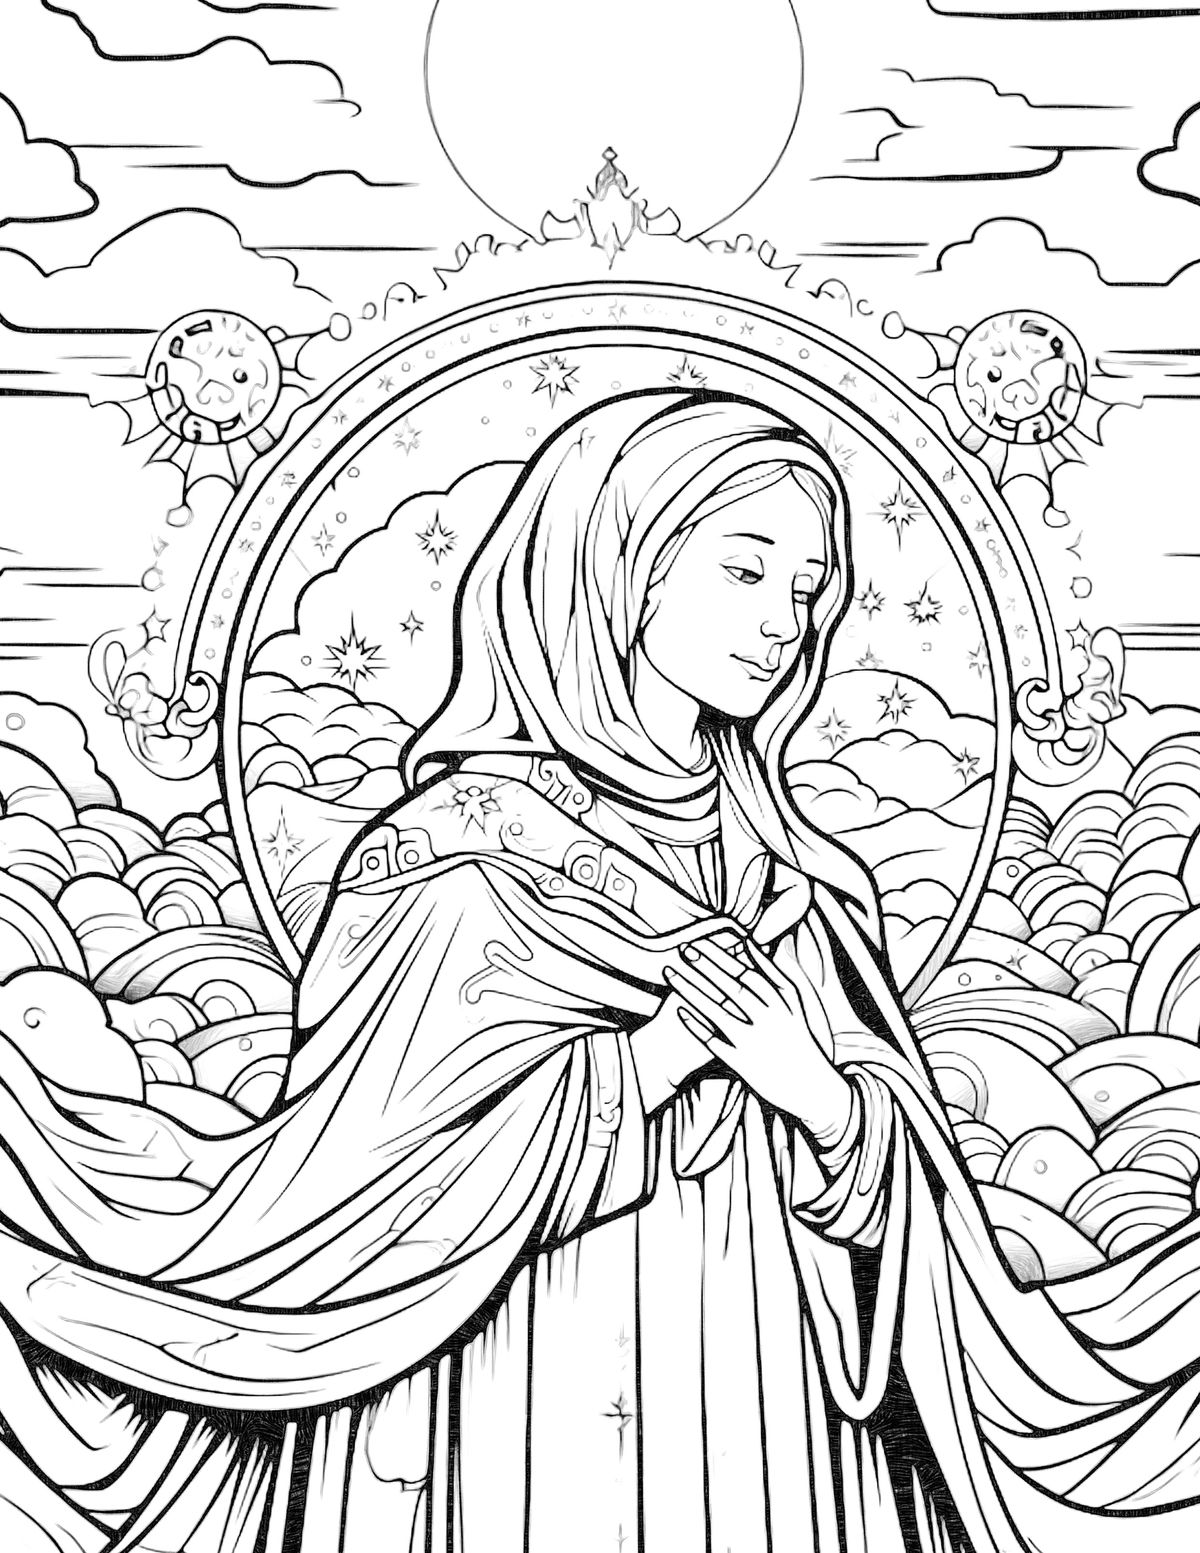 Virgin mary coloring pages